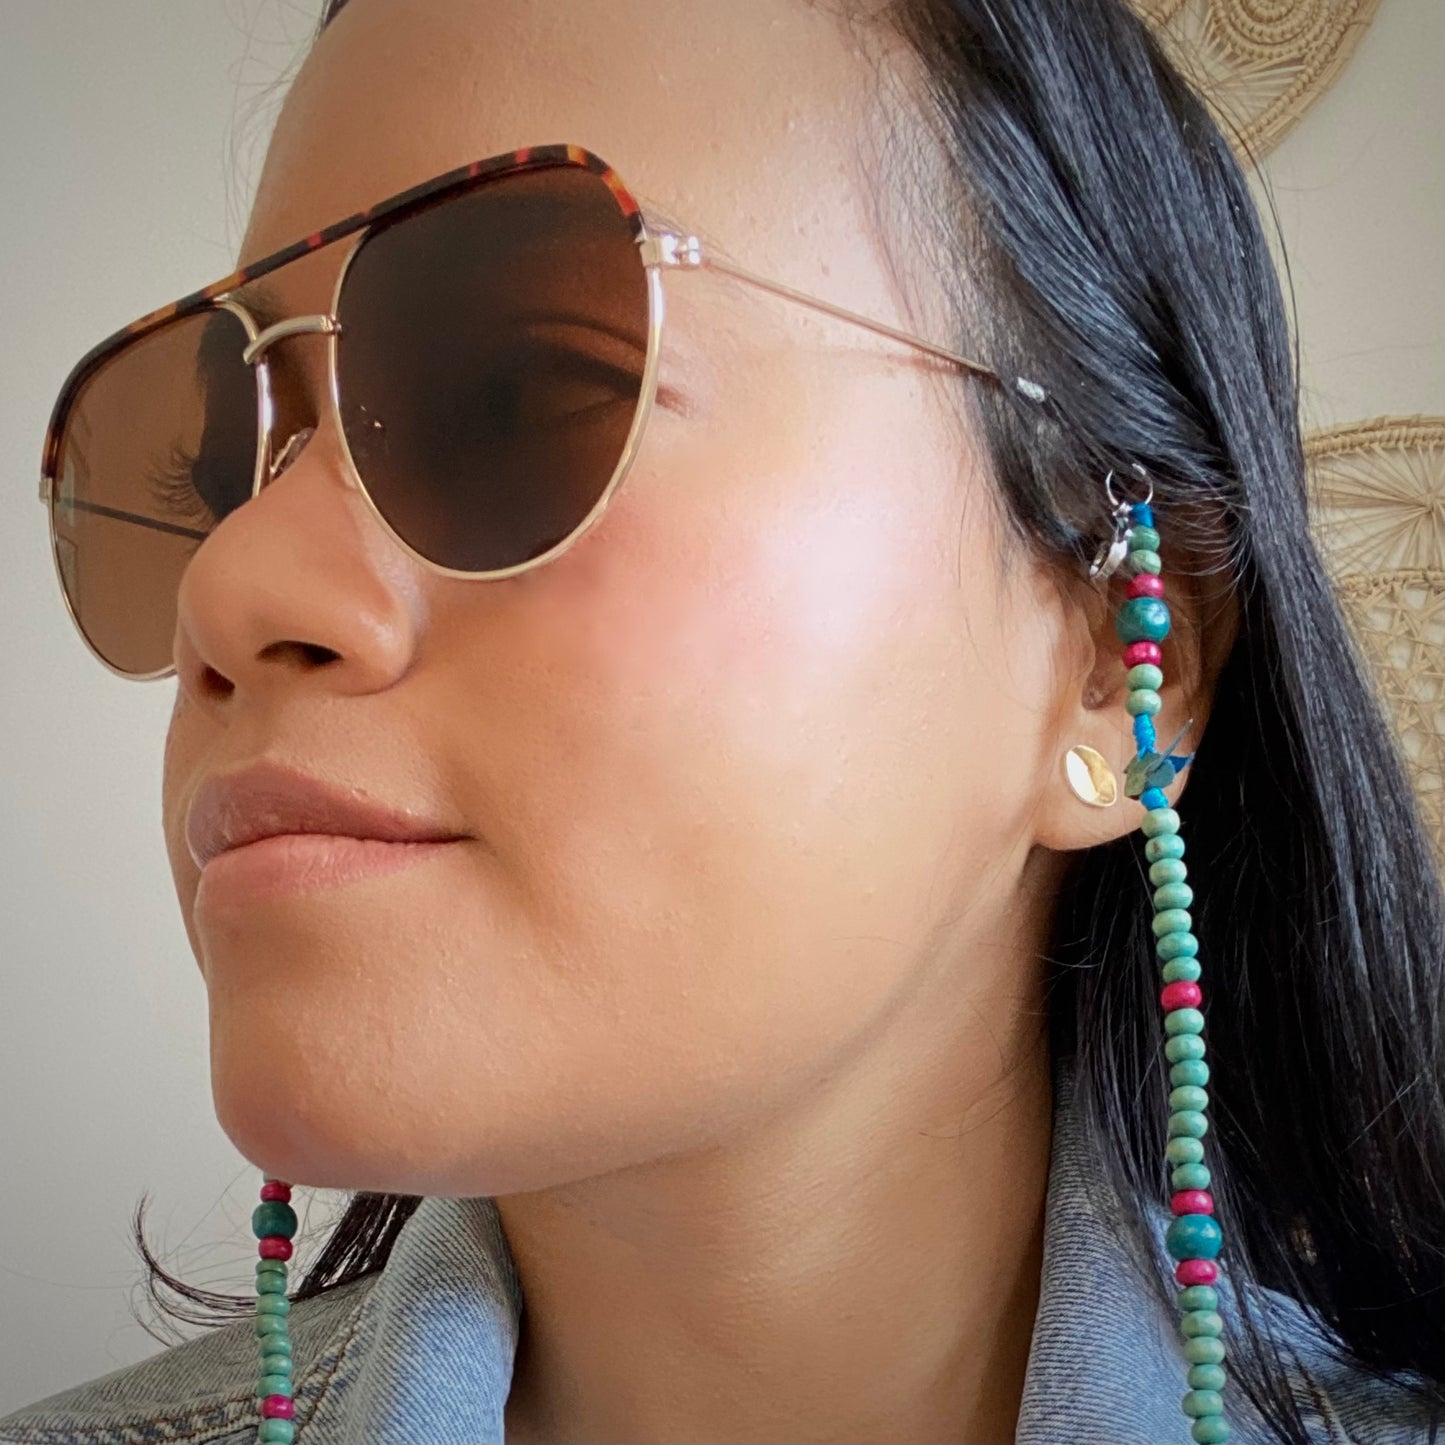 Model wearing sunglasses with blue bird chain.  Handmade in Colombia.